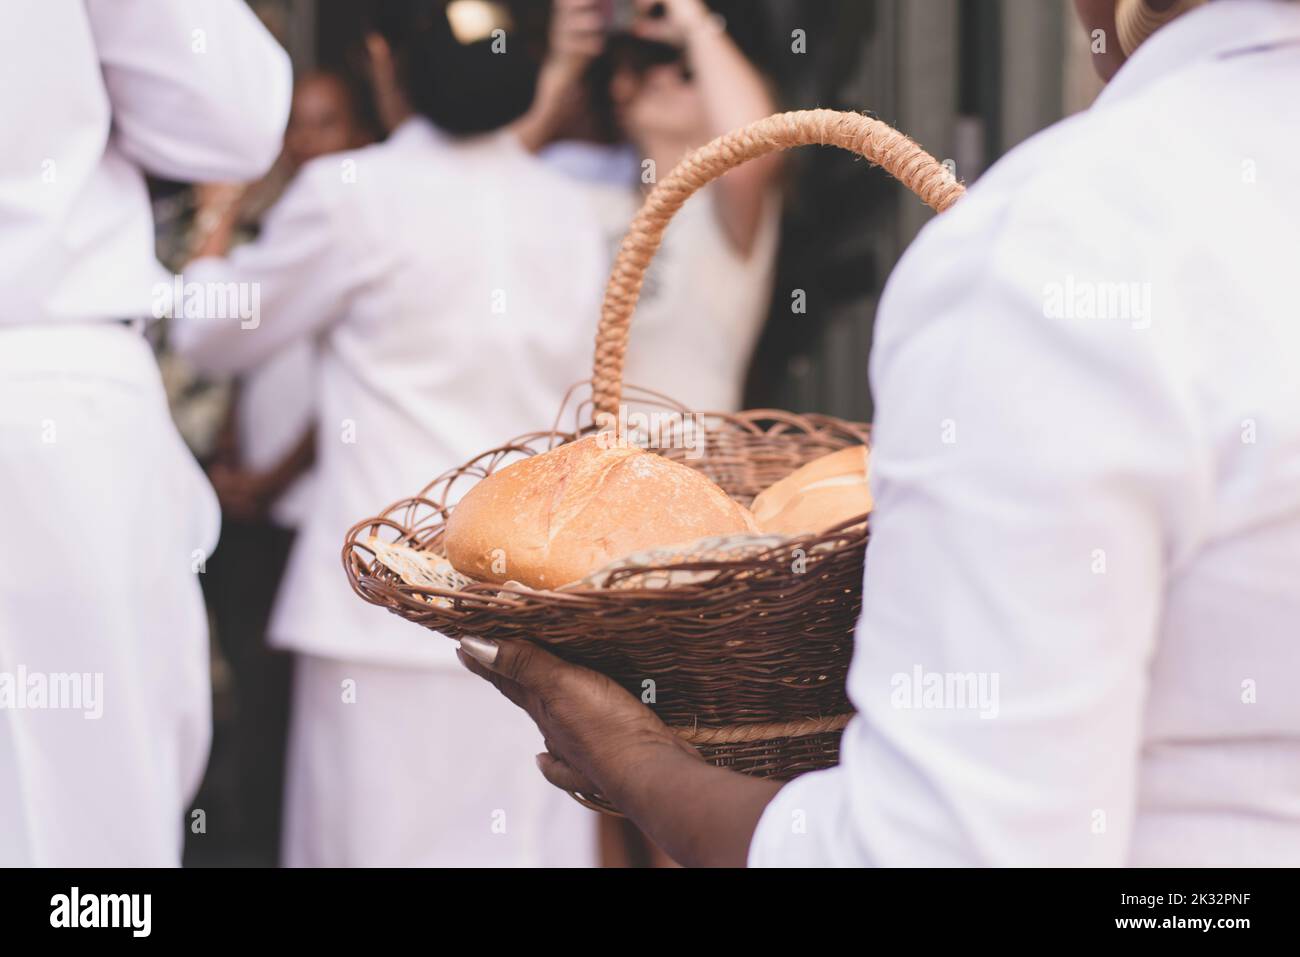 A closeup of People entering the church with food for the religious celebration Stock Photo